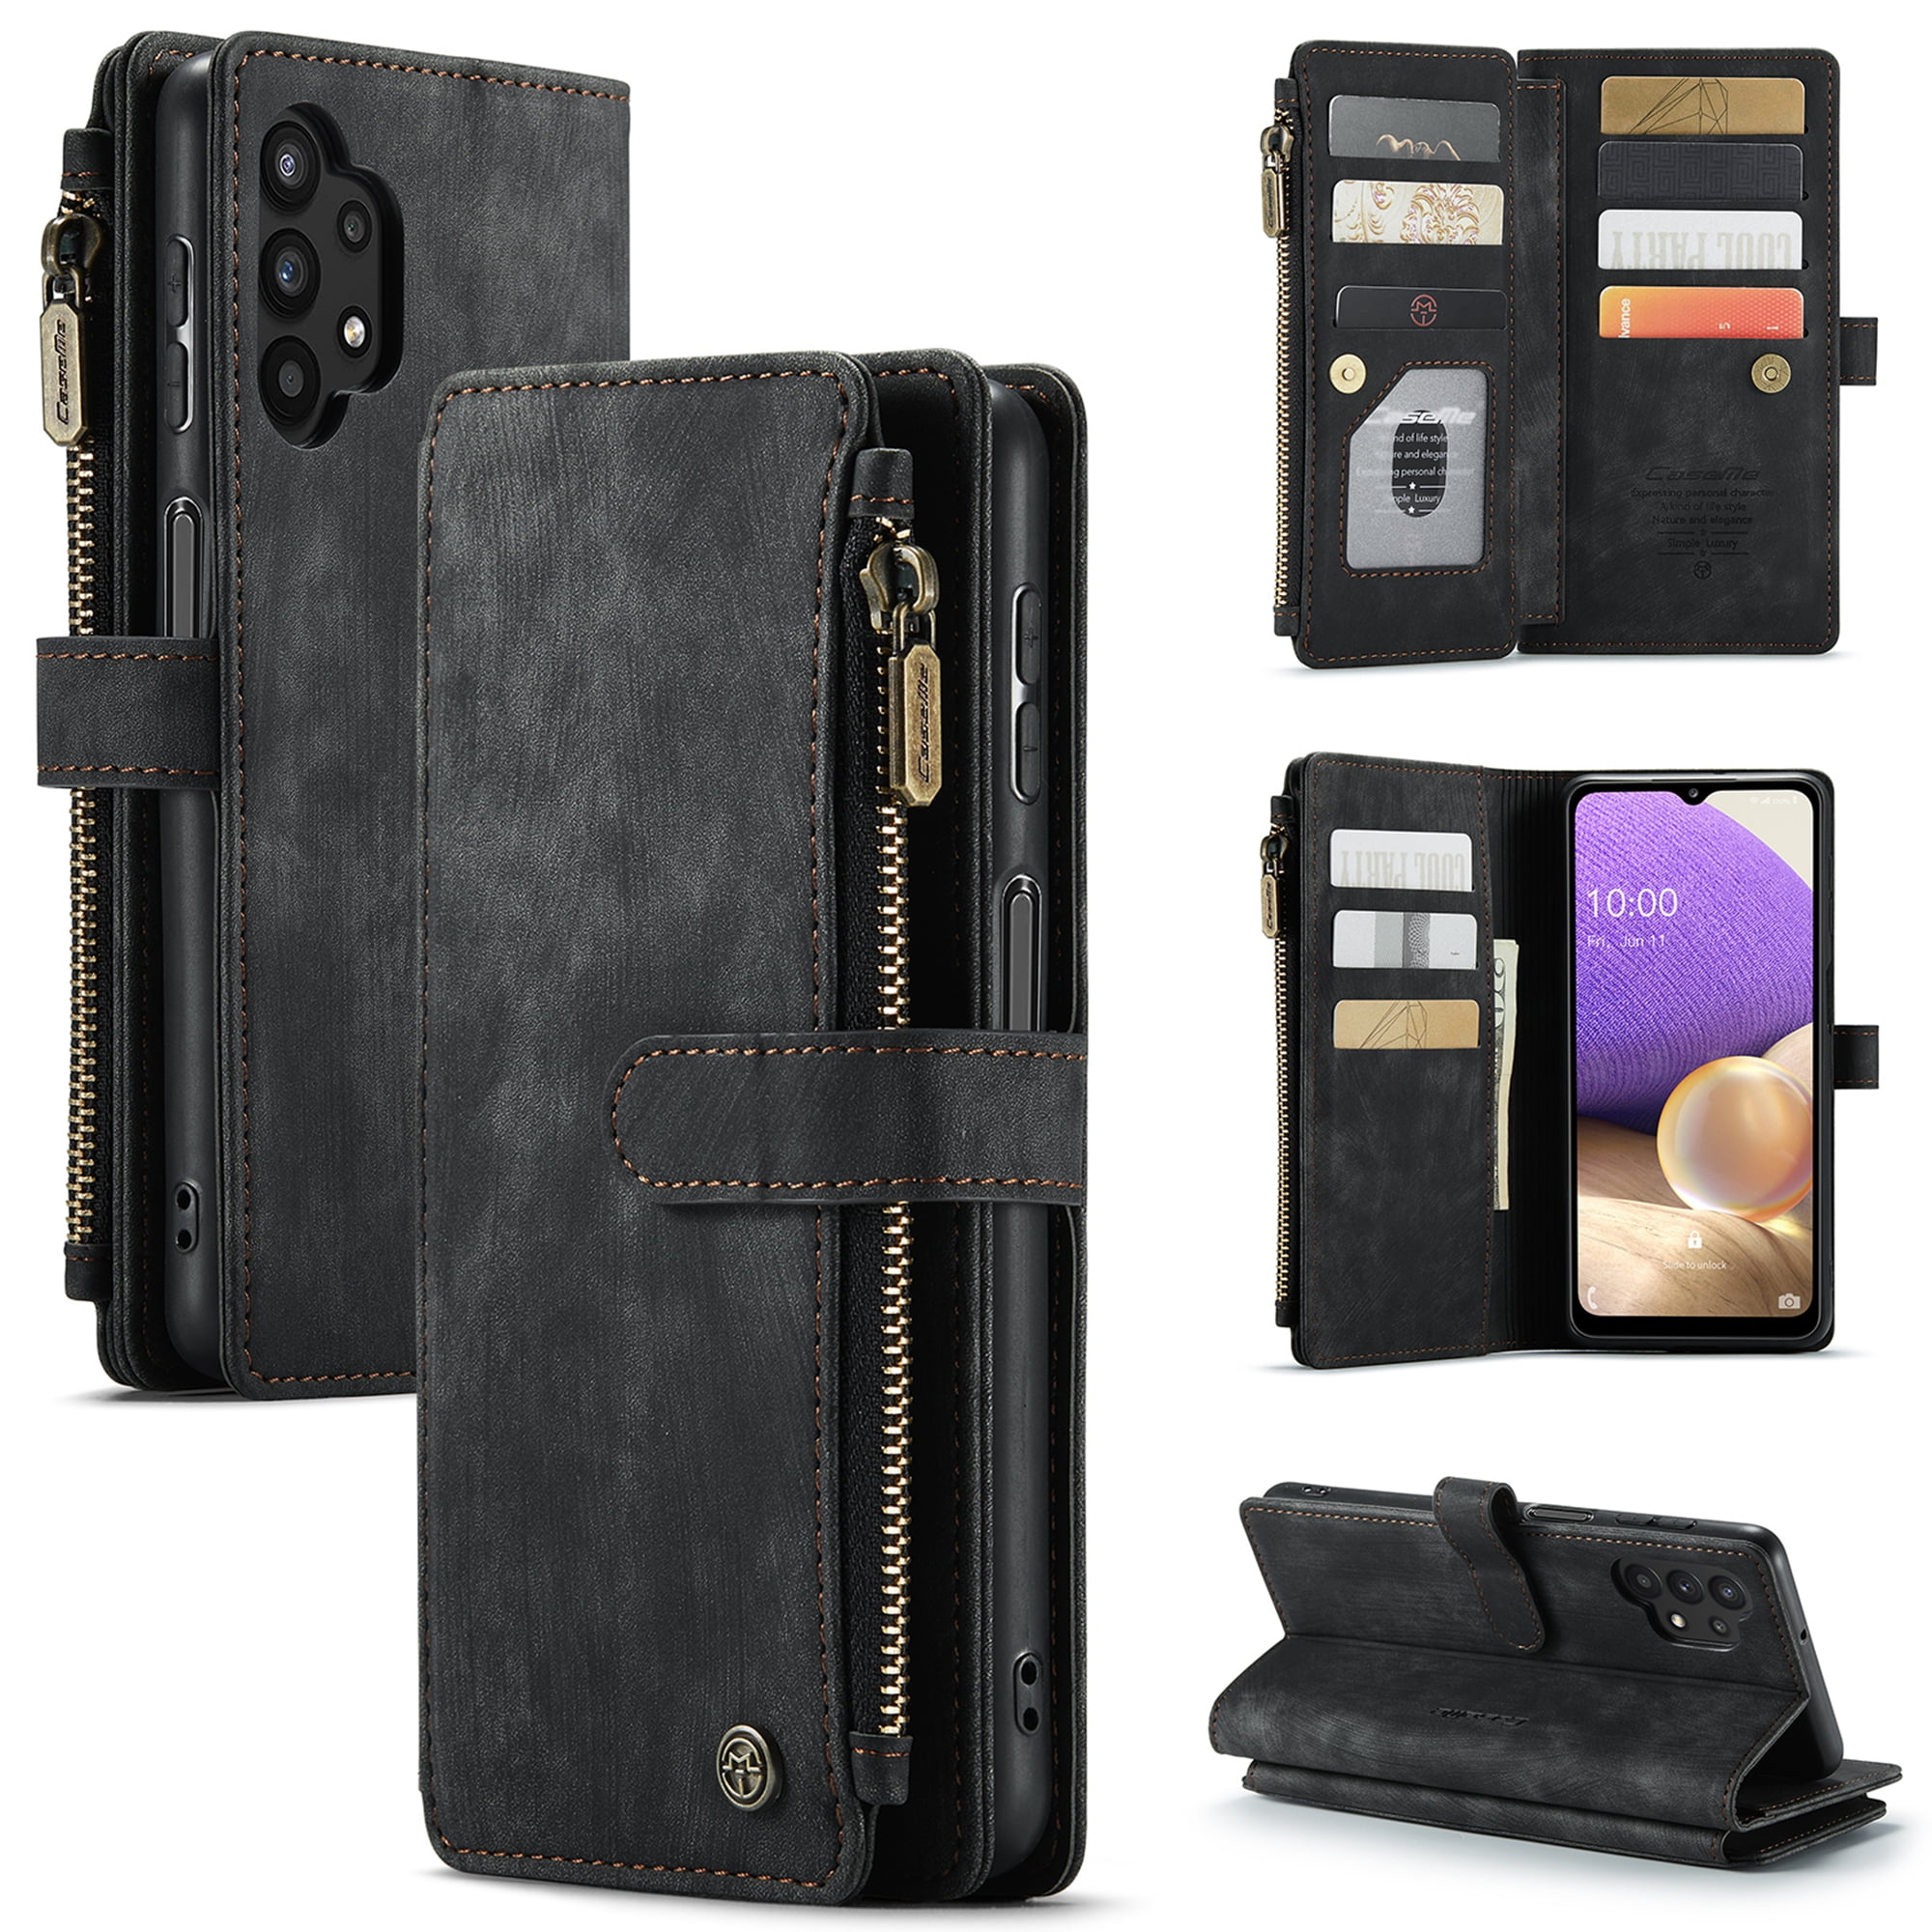 Card Holder Kickstand Magnetic,Leather Flip Case for Samsung Galaxy A32 5G Coffee RFID Blocking Samsung Galaxy A32 5G Case,Samsung Galaxy A32 5G Wallet Case with 